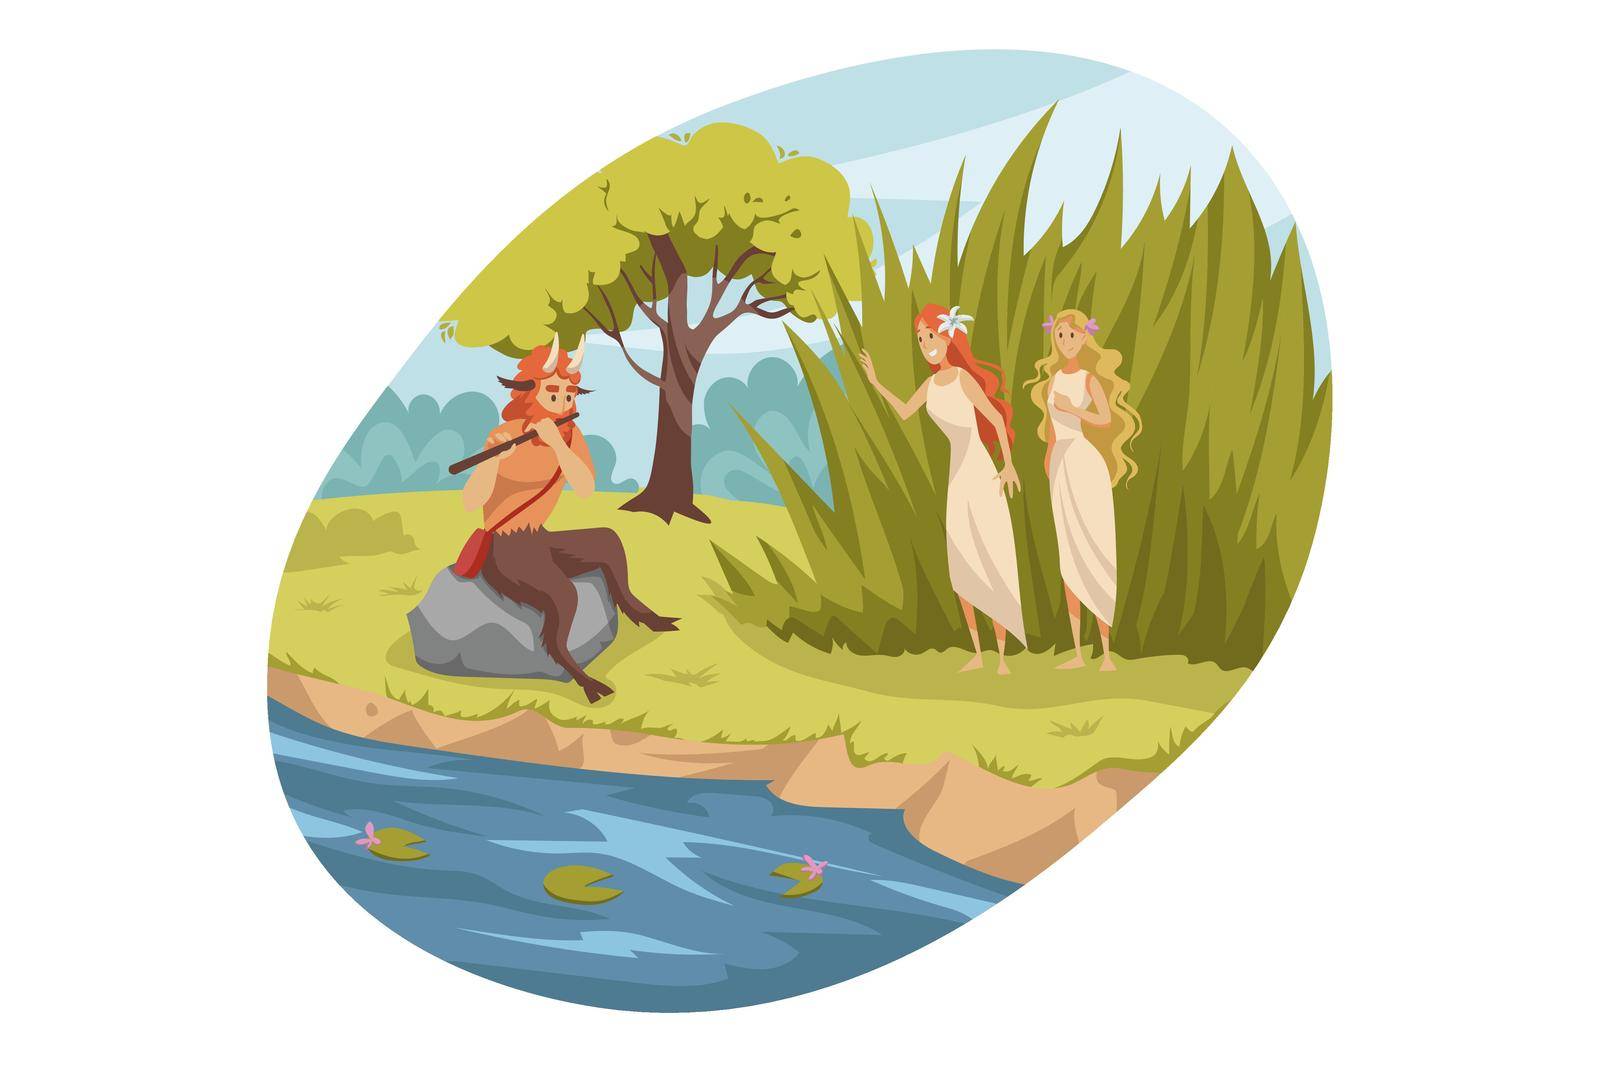 Mythology, Greece, Olympus, legend, religion concept. Ancient Greek religious myths illustration series. Satyr demon from suite of Dionysus playing flute for two young girls nymphes nature patroness.